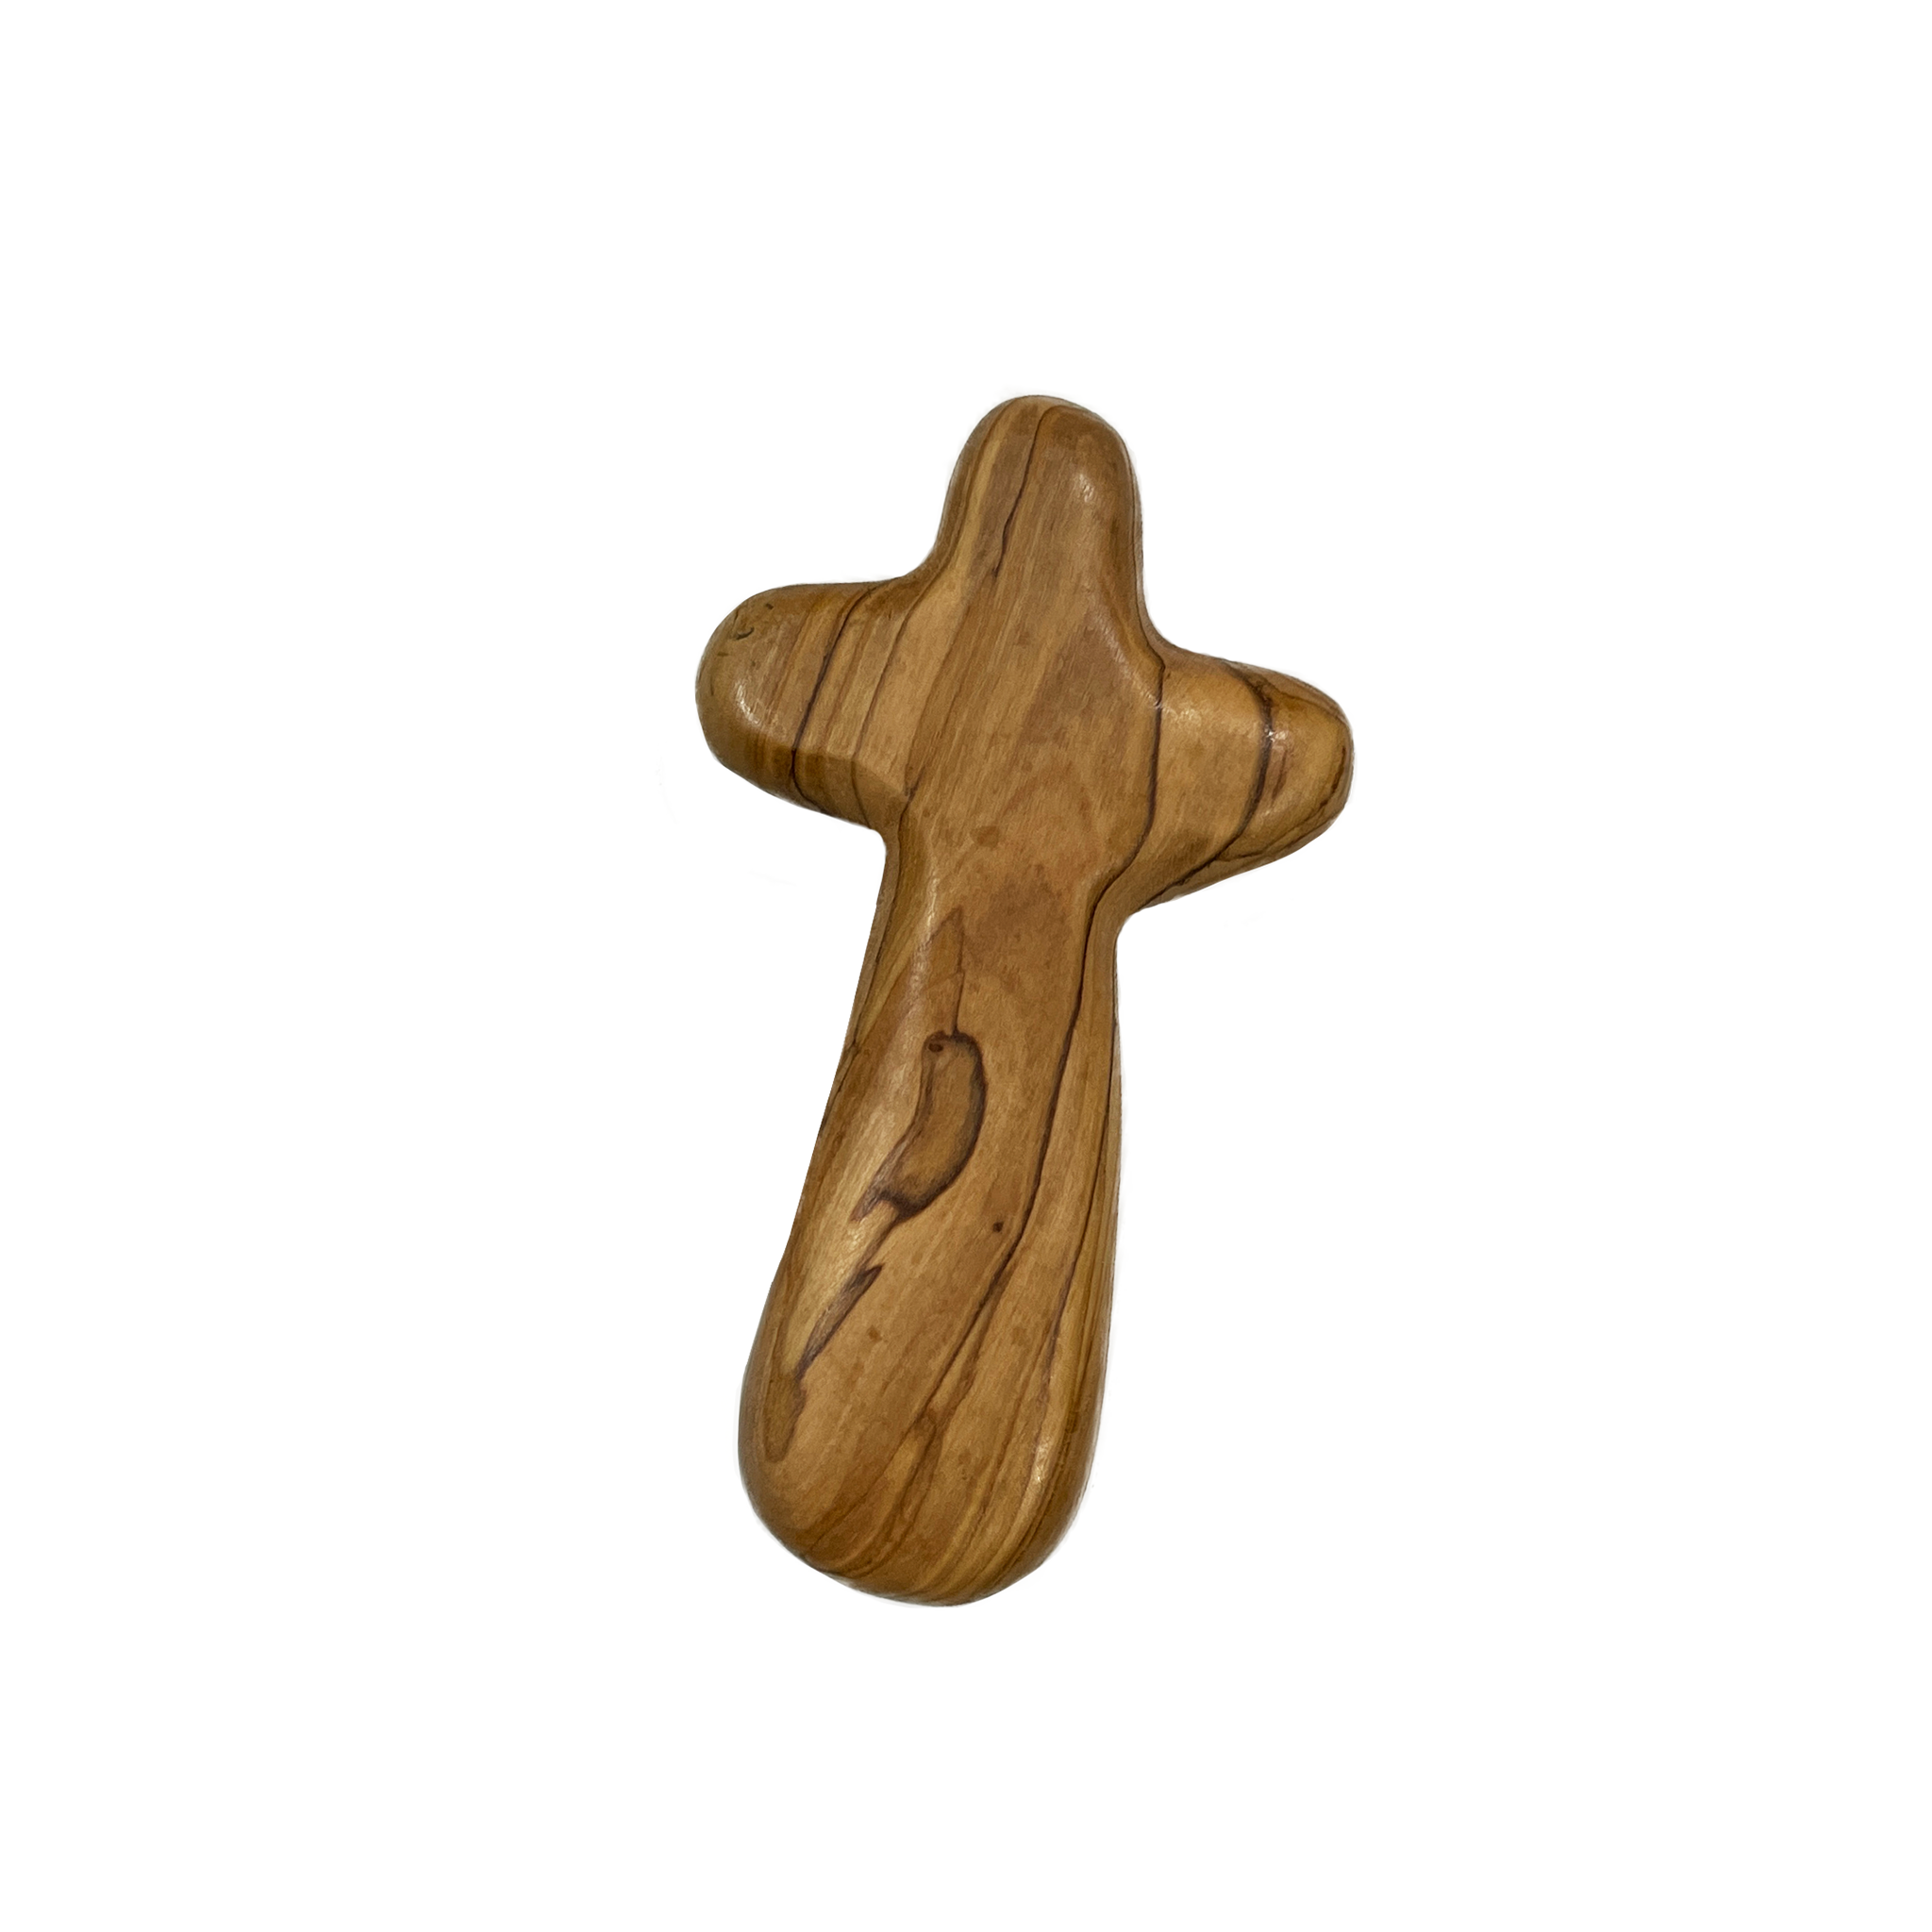 OLIVE WOOD PALM HOLDING CROSS FROM THE HOLY LAND